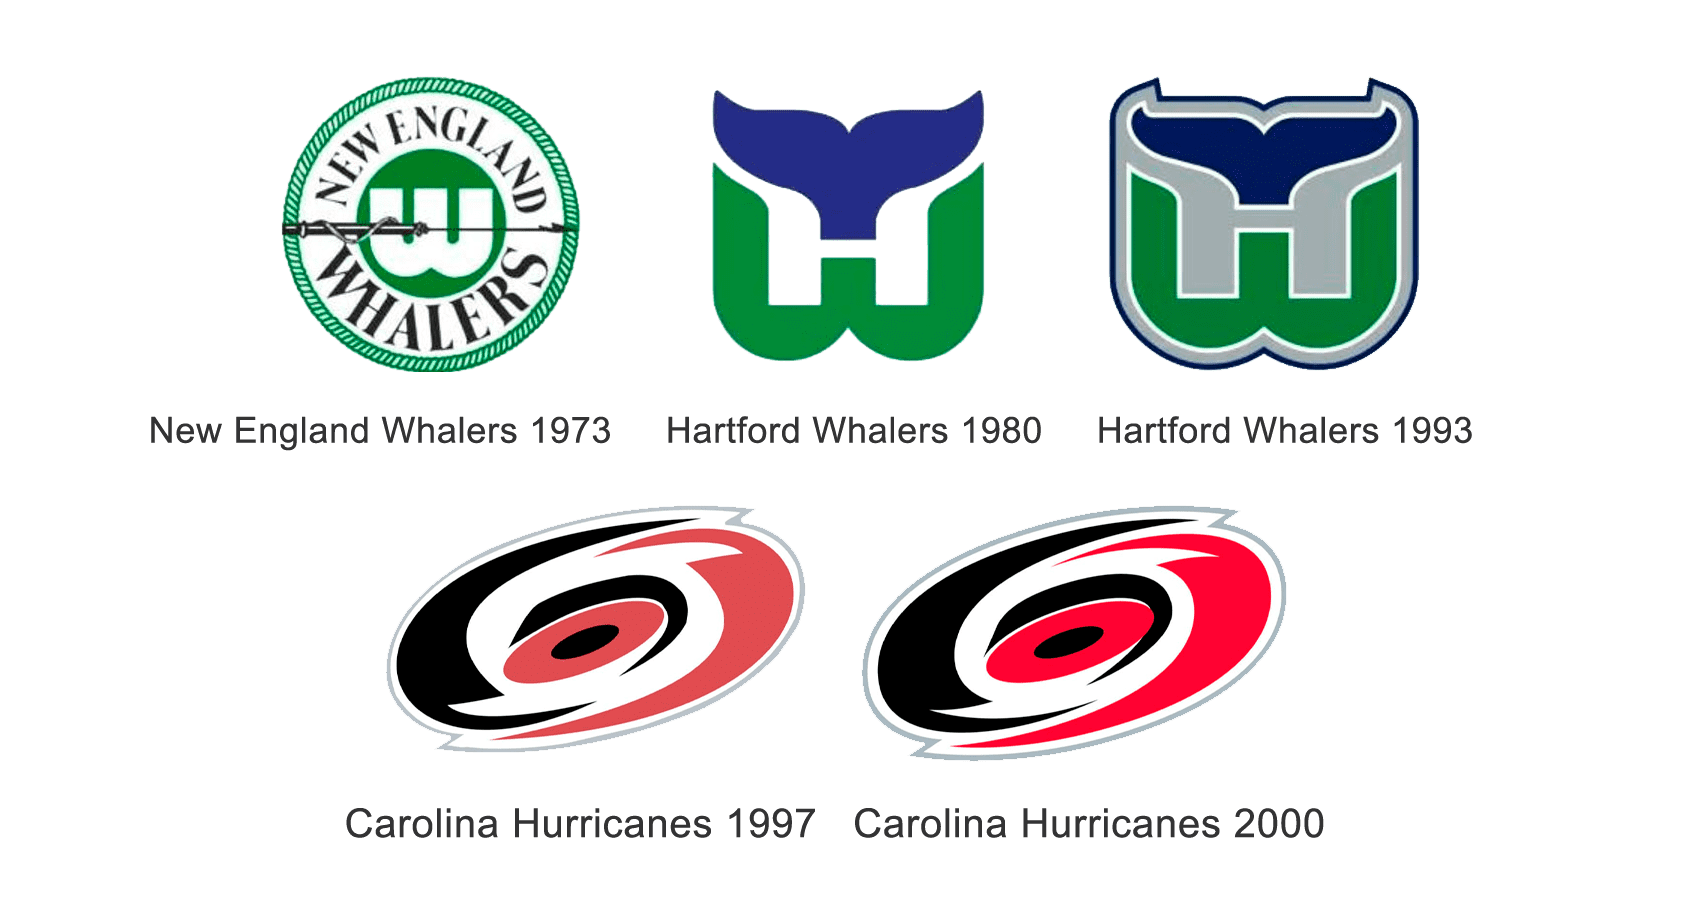  New England Whalers